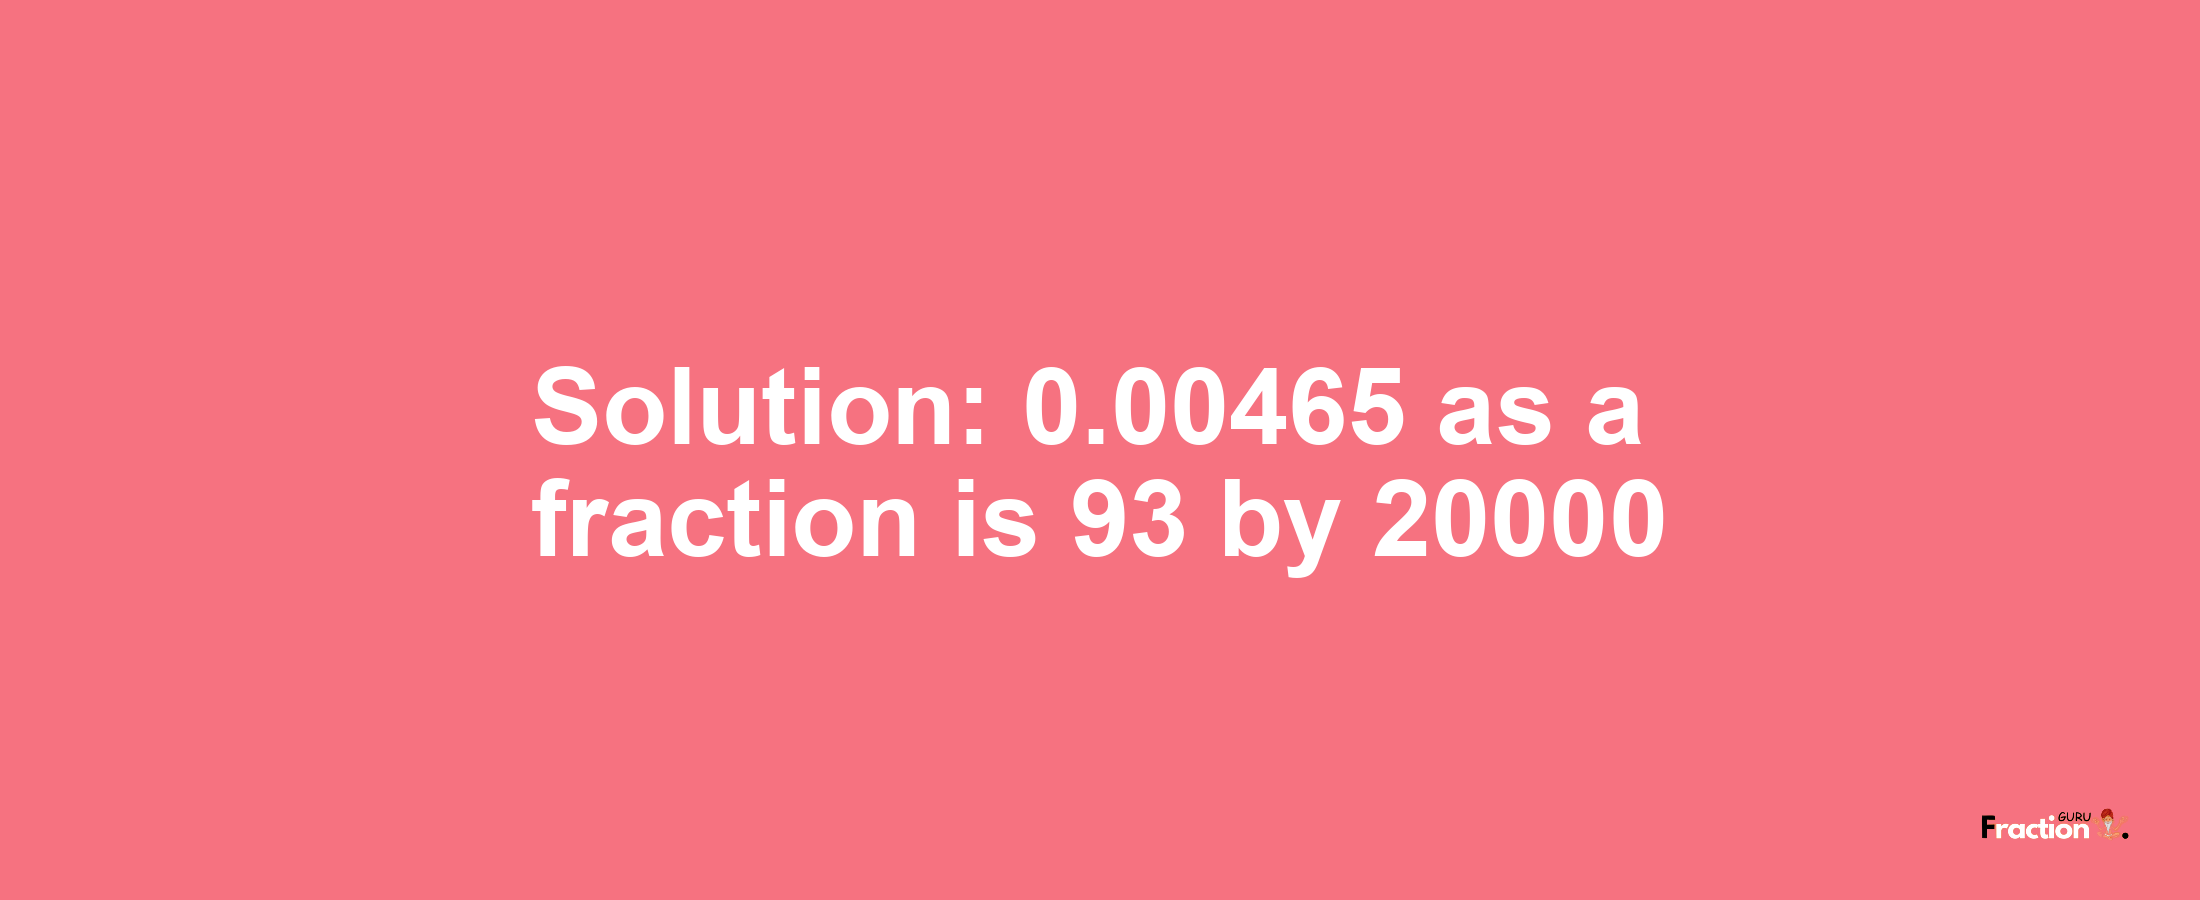 Solution:0.00465 as a fraction is 93/20000